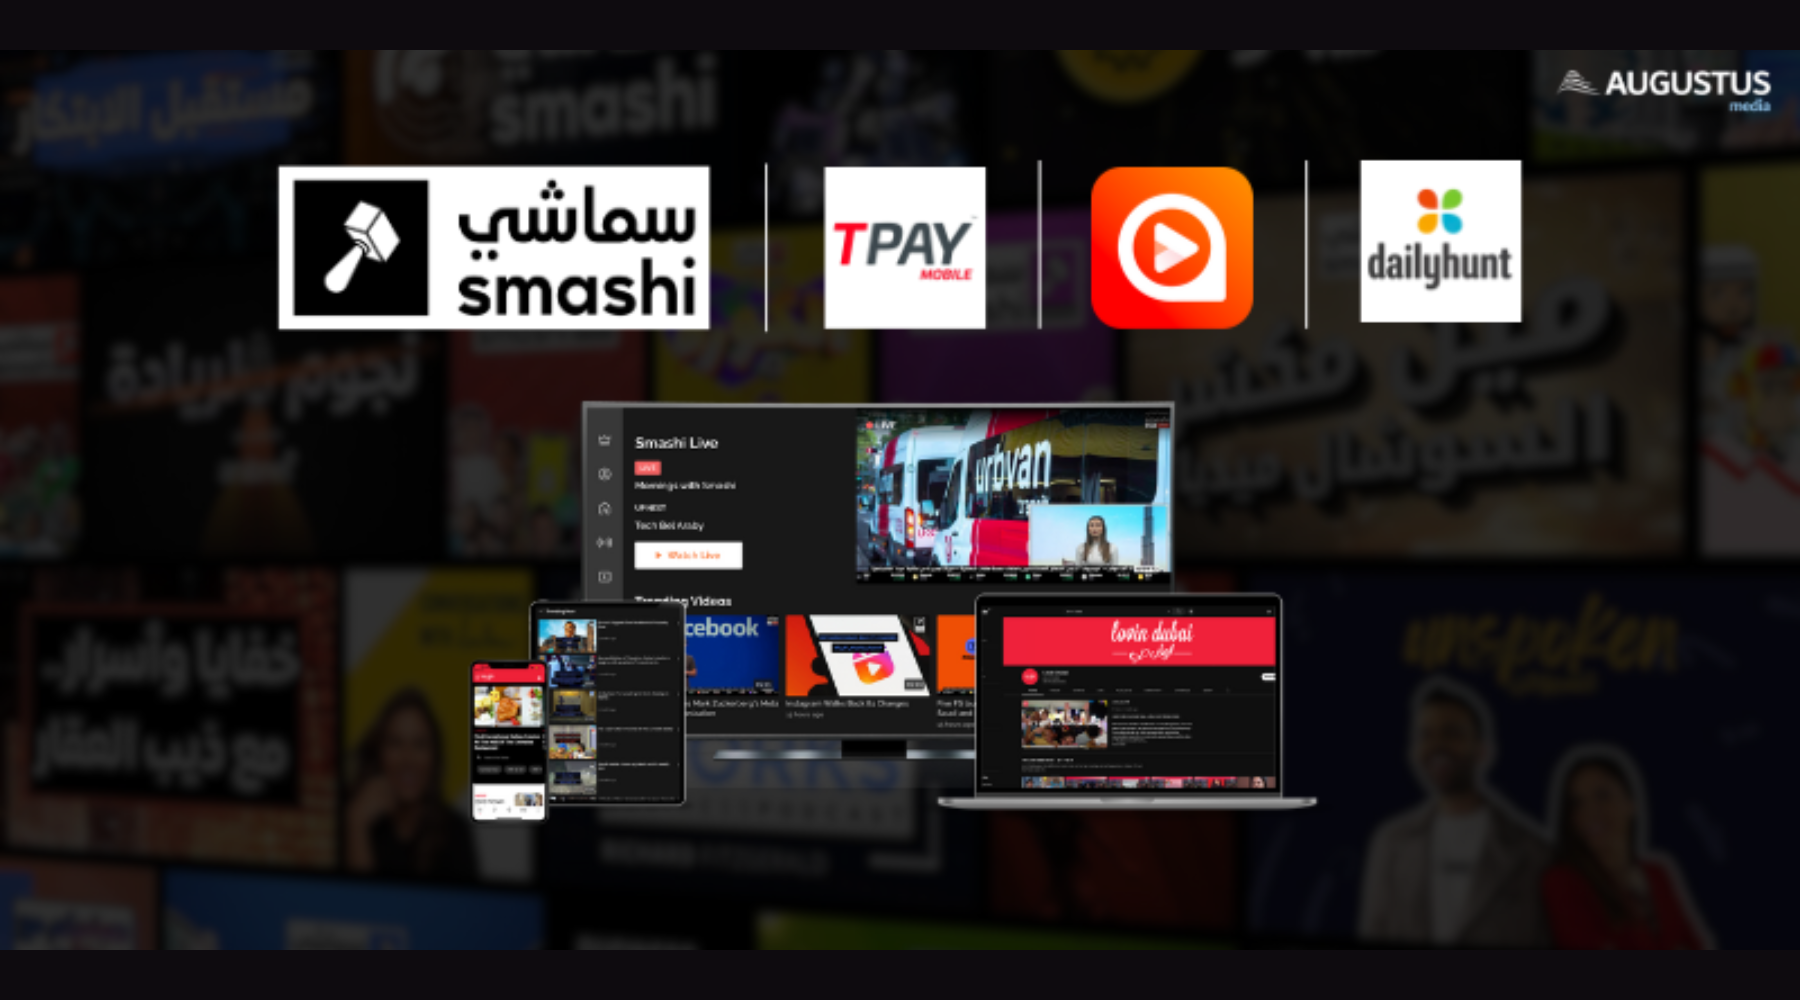 Augustus Media Expands Reach With New Partnerships with T-Pay, Daily Hunt & Visha App